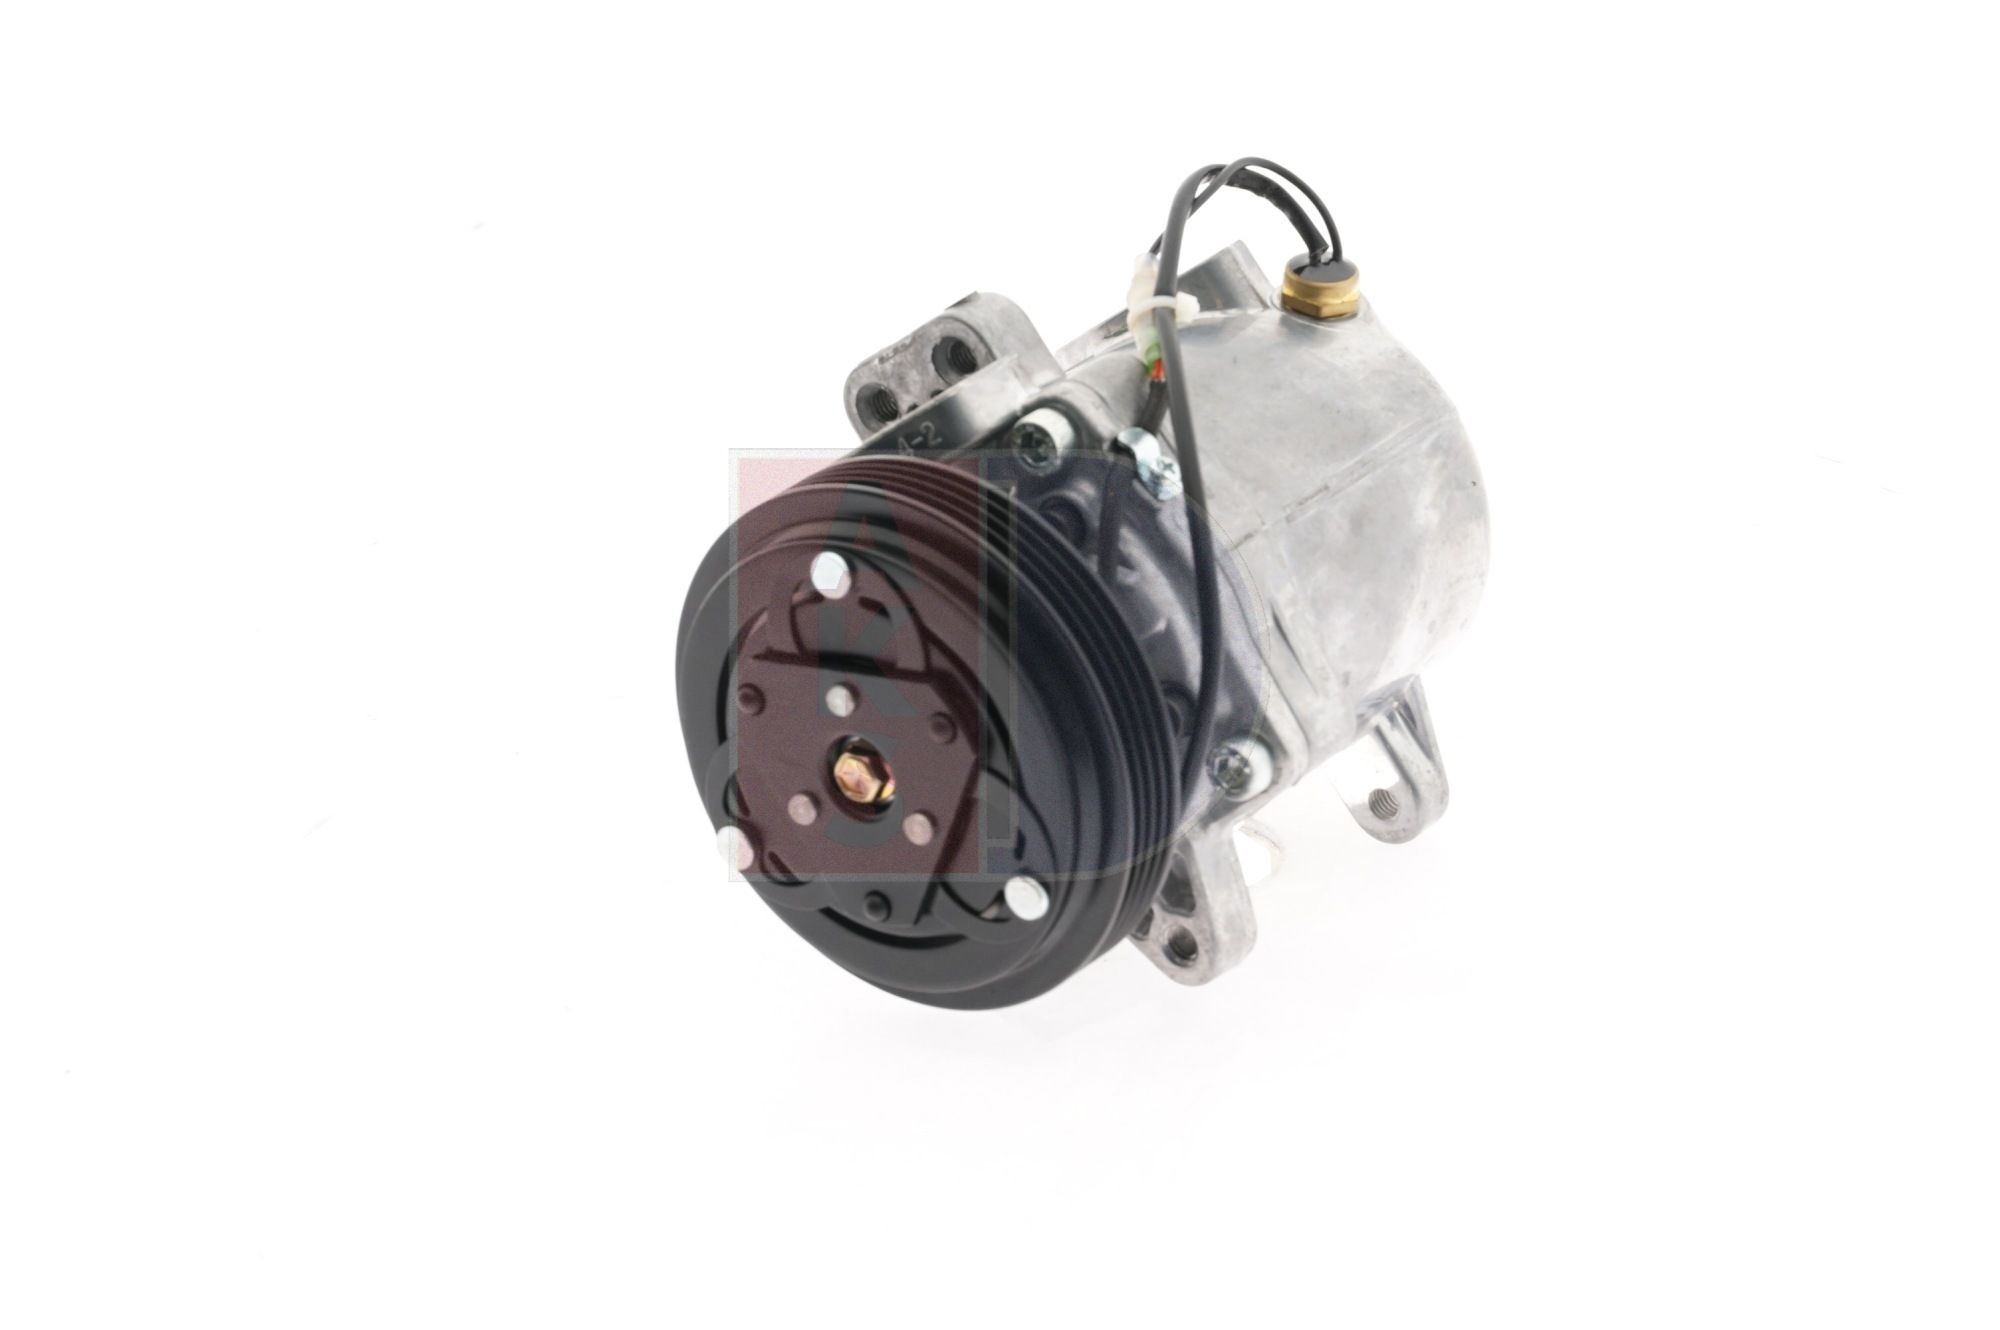 Air conditioning compressor 851063N from AKS DASIS